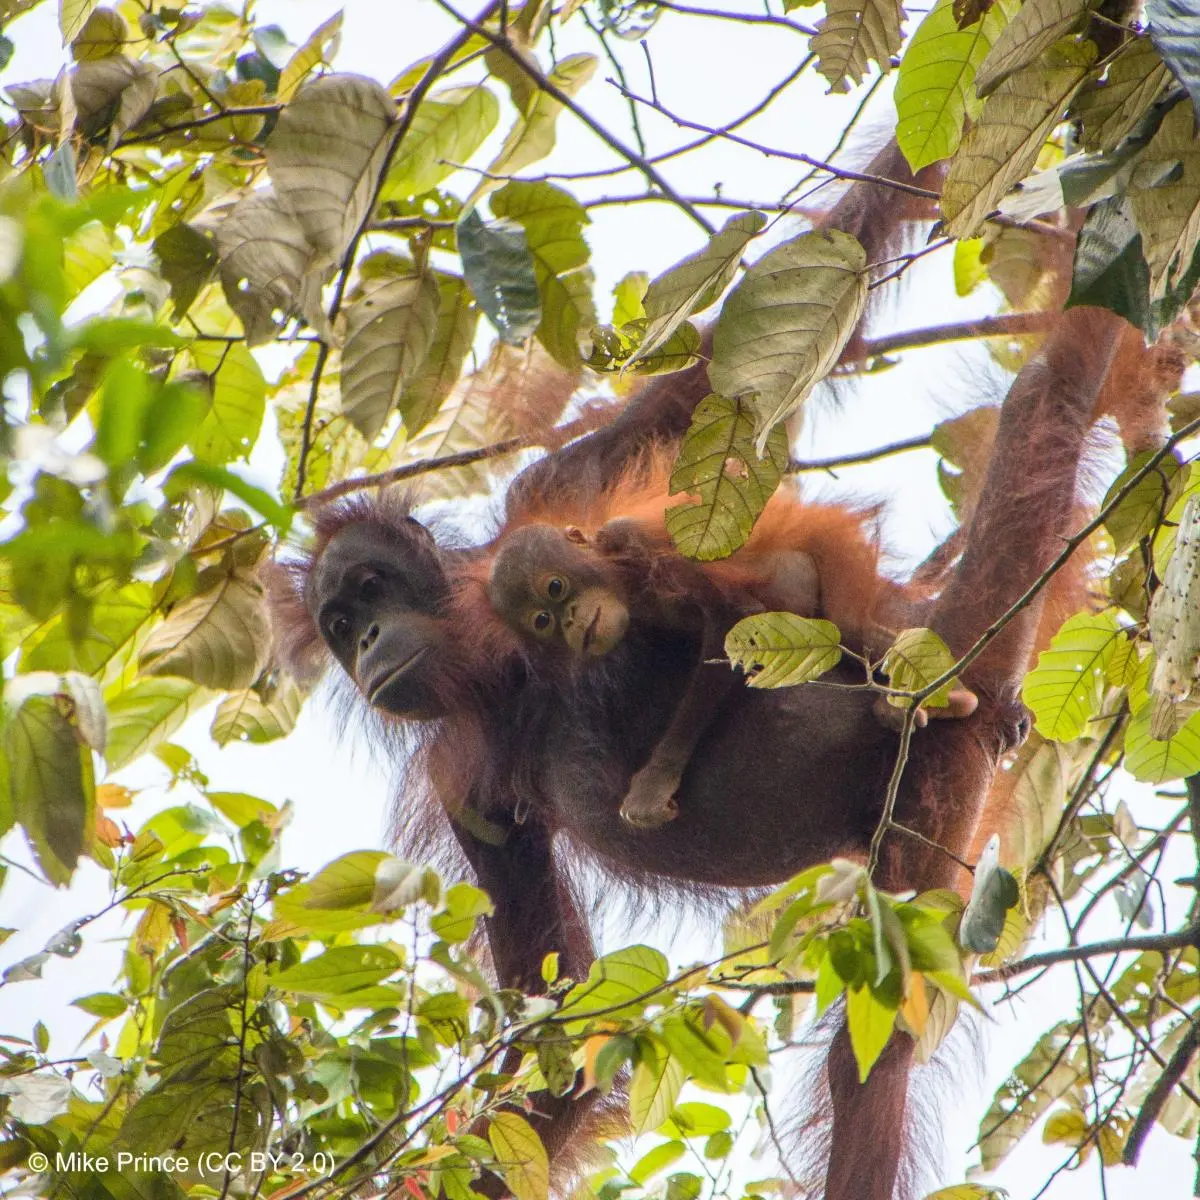 The Bornean orangutan is classed as Critically Endangered on the IUCN Red List.